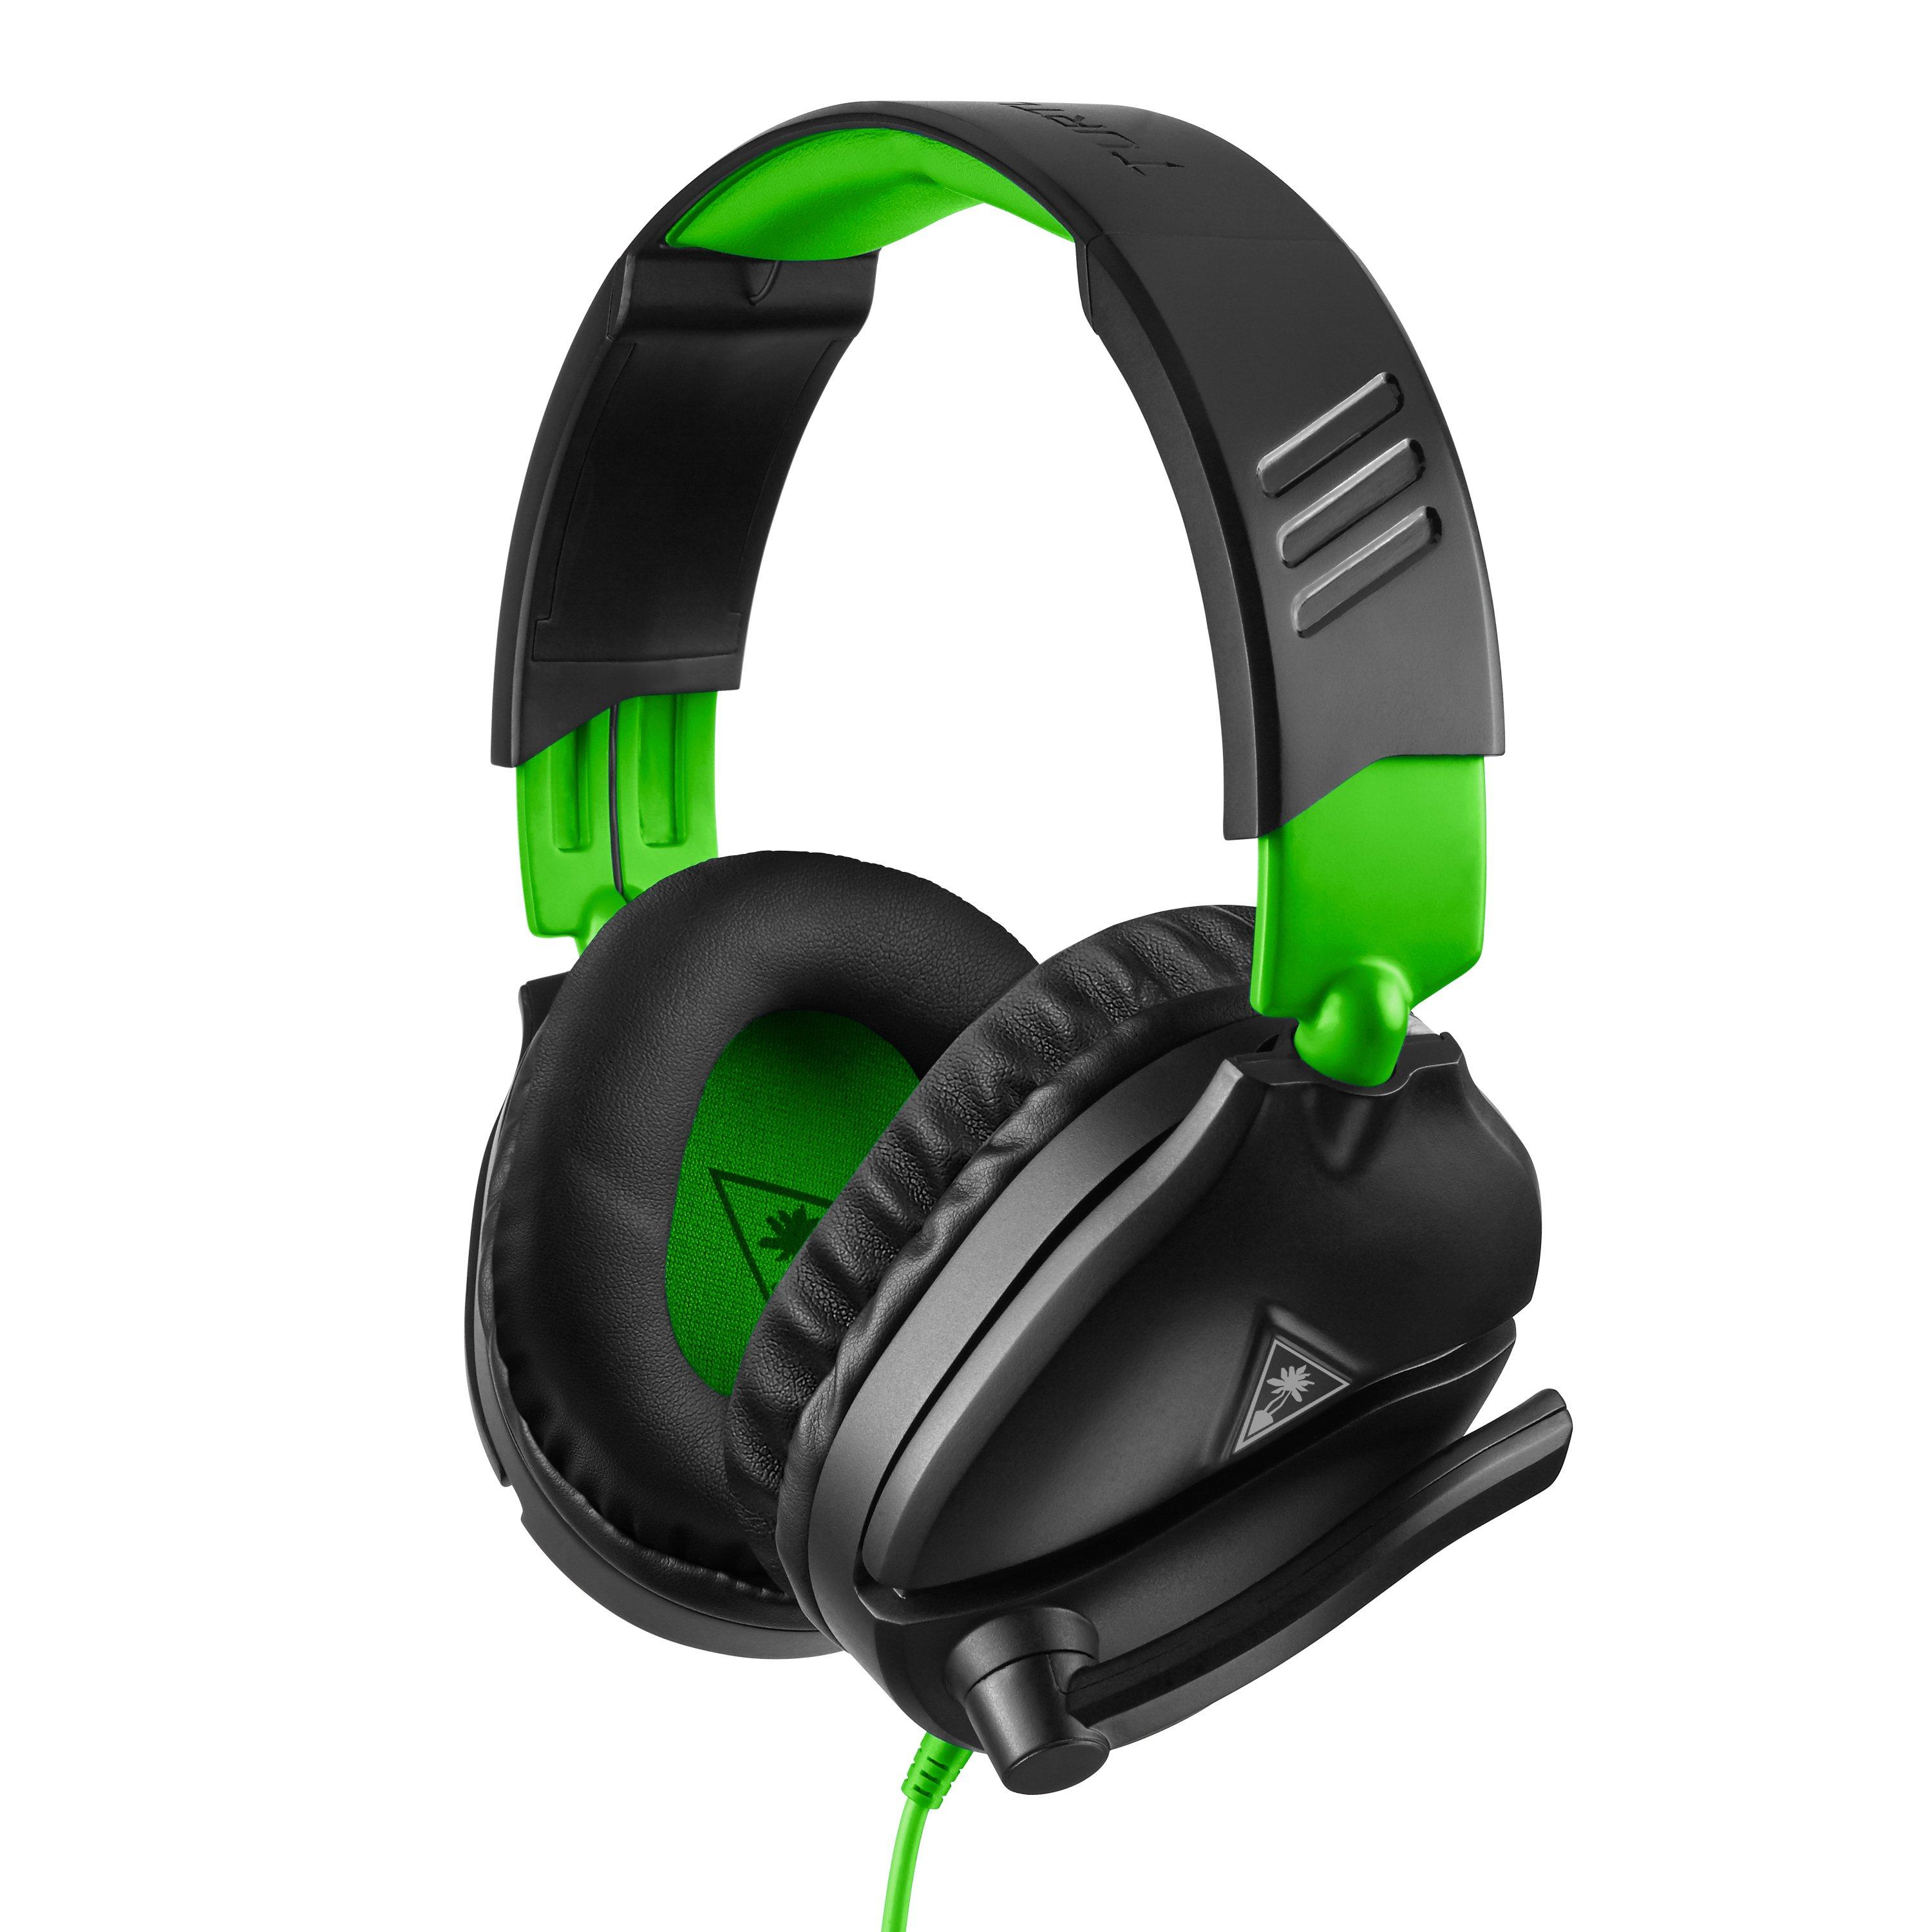 xbox one recon 70 white wired gaming headset